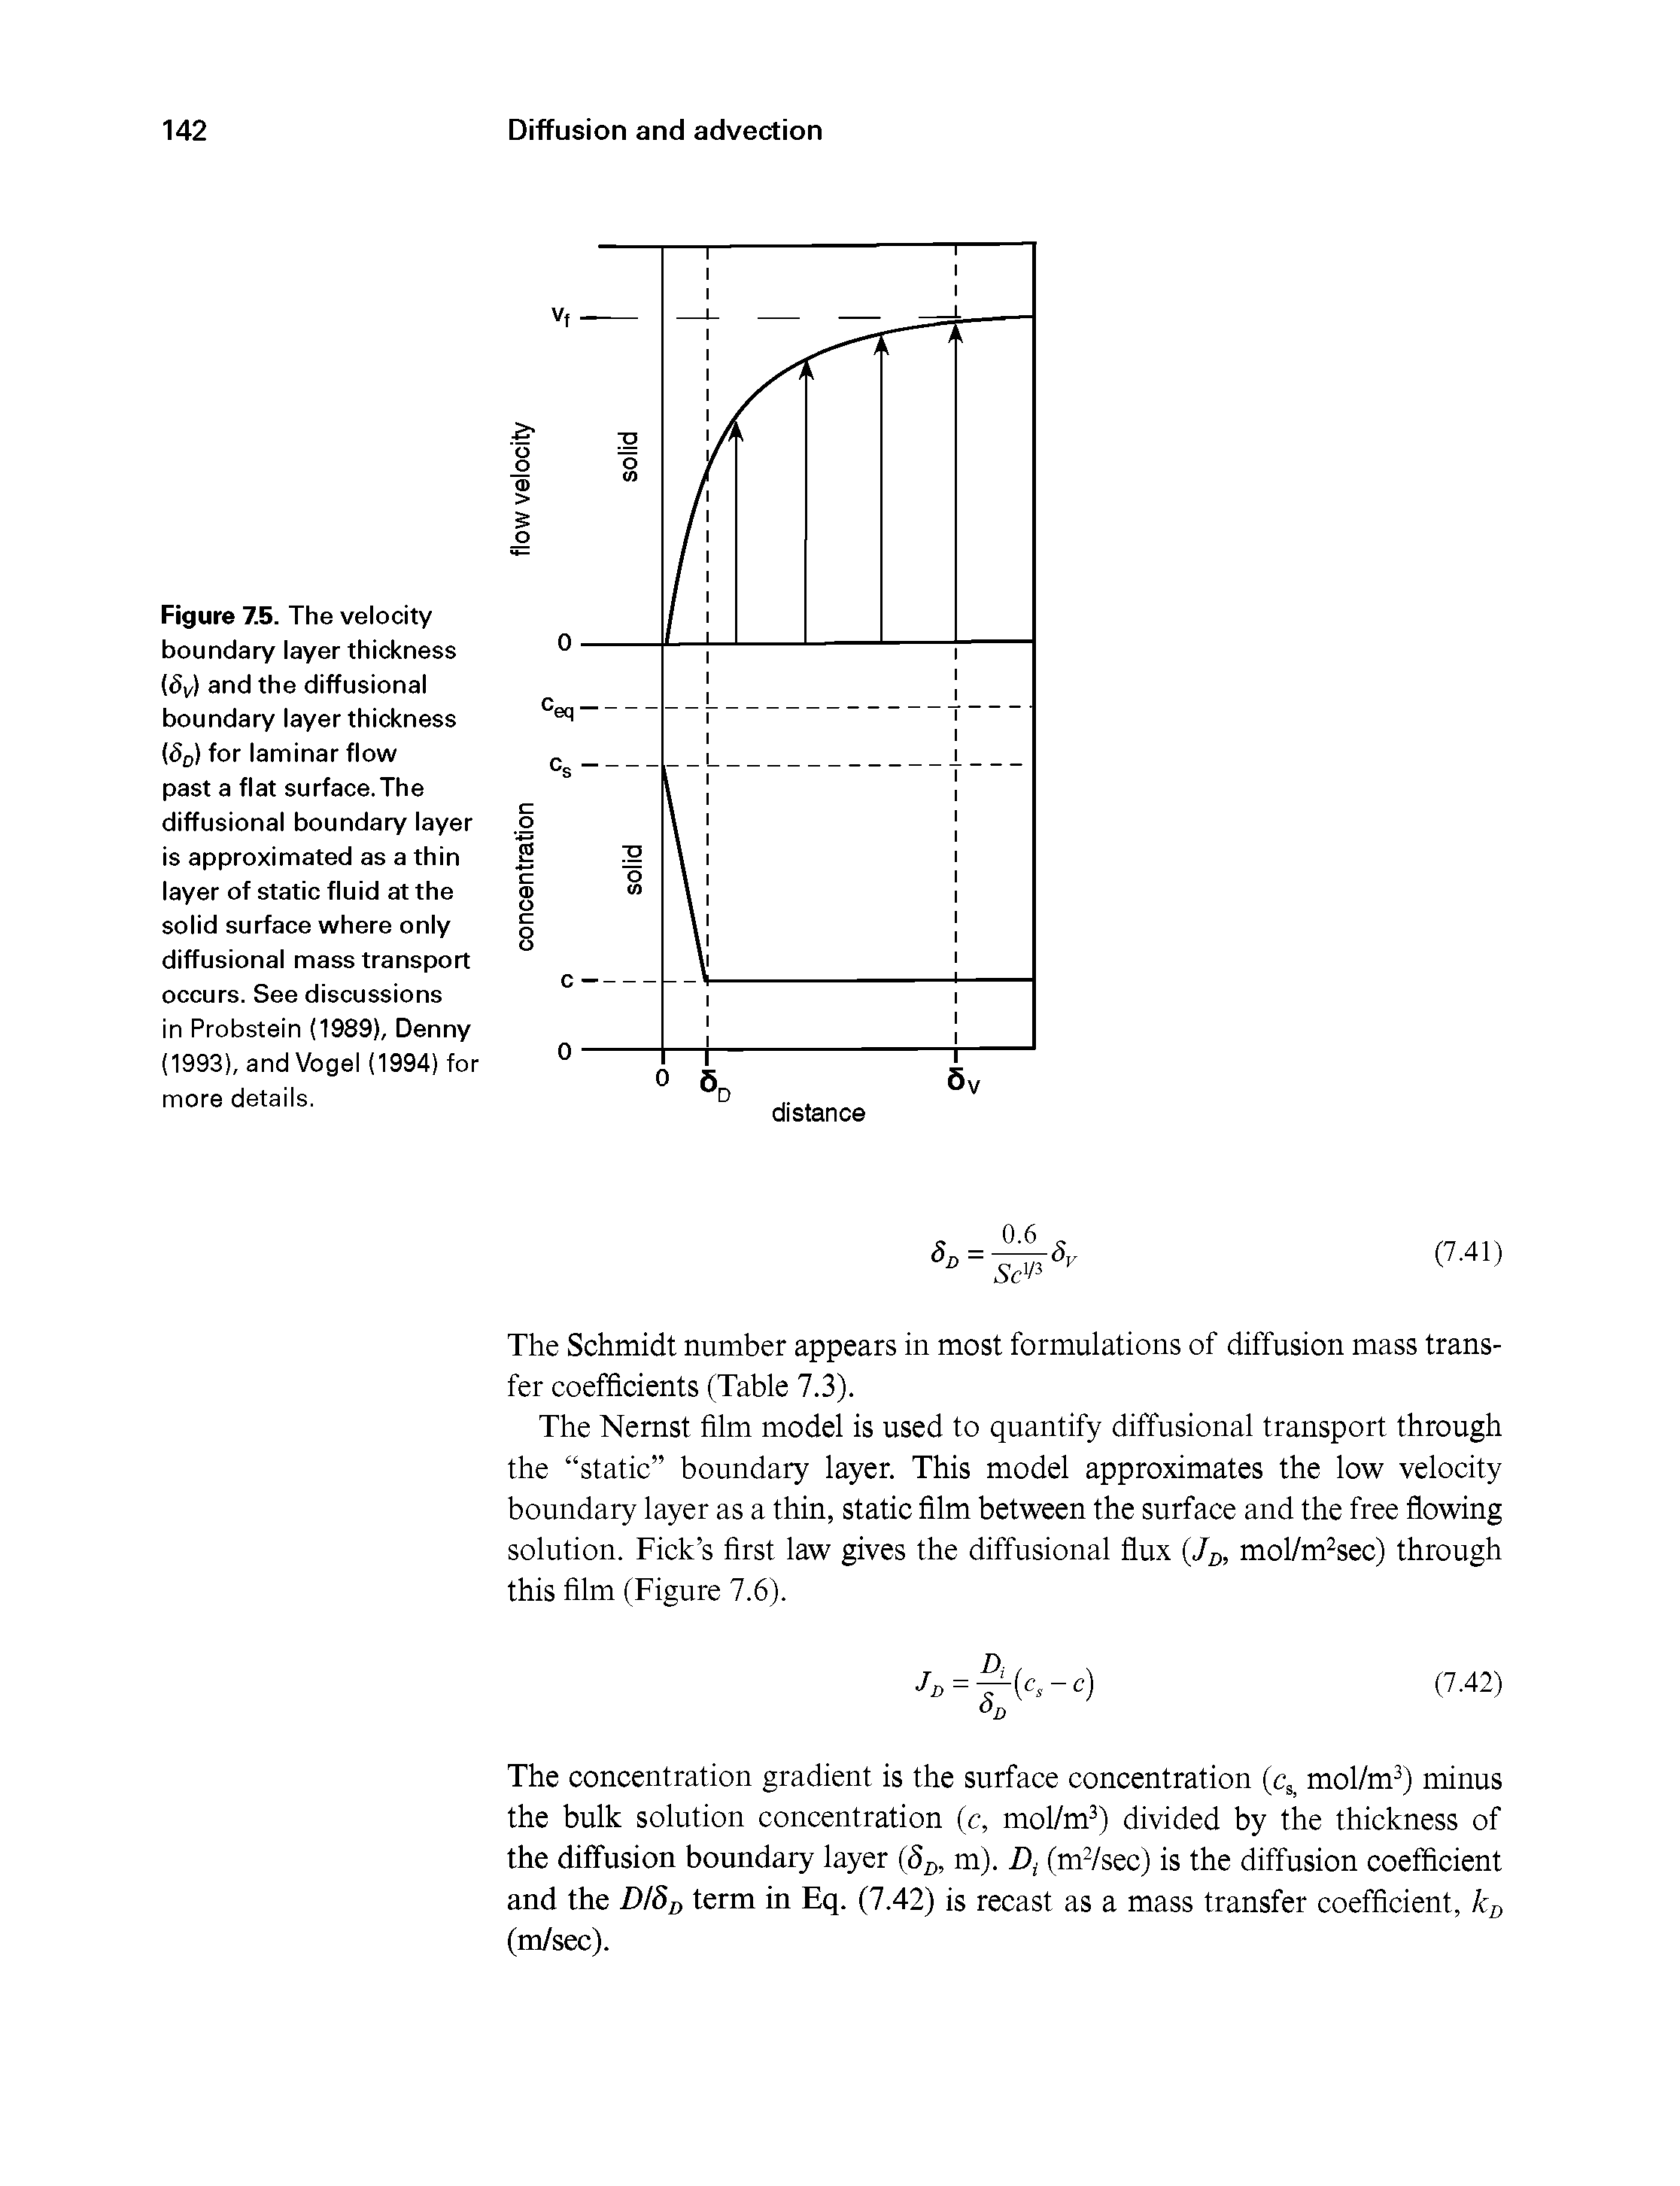 Figure 7.5. The velocity boundary layer thickness (S)/) snd the diffusional boundary layer thickness So) for laminar flow past a flat surface.The diffusional boundary layer is approximated as a thin layer of static fluid at the solid surface where only diffusional mass transport occurs. See discussions in Probstein (1989), Denny (1993), and Vogel (1994) for more details.